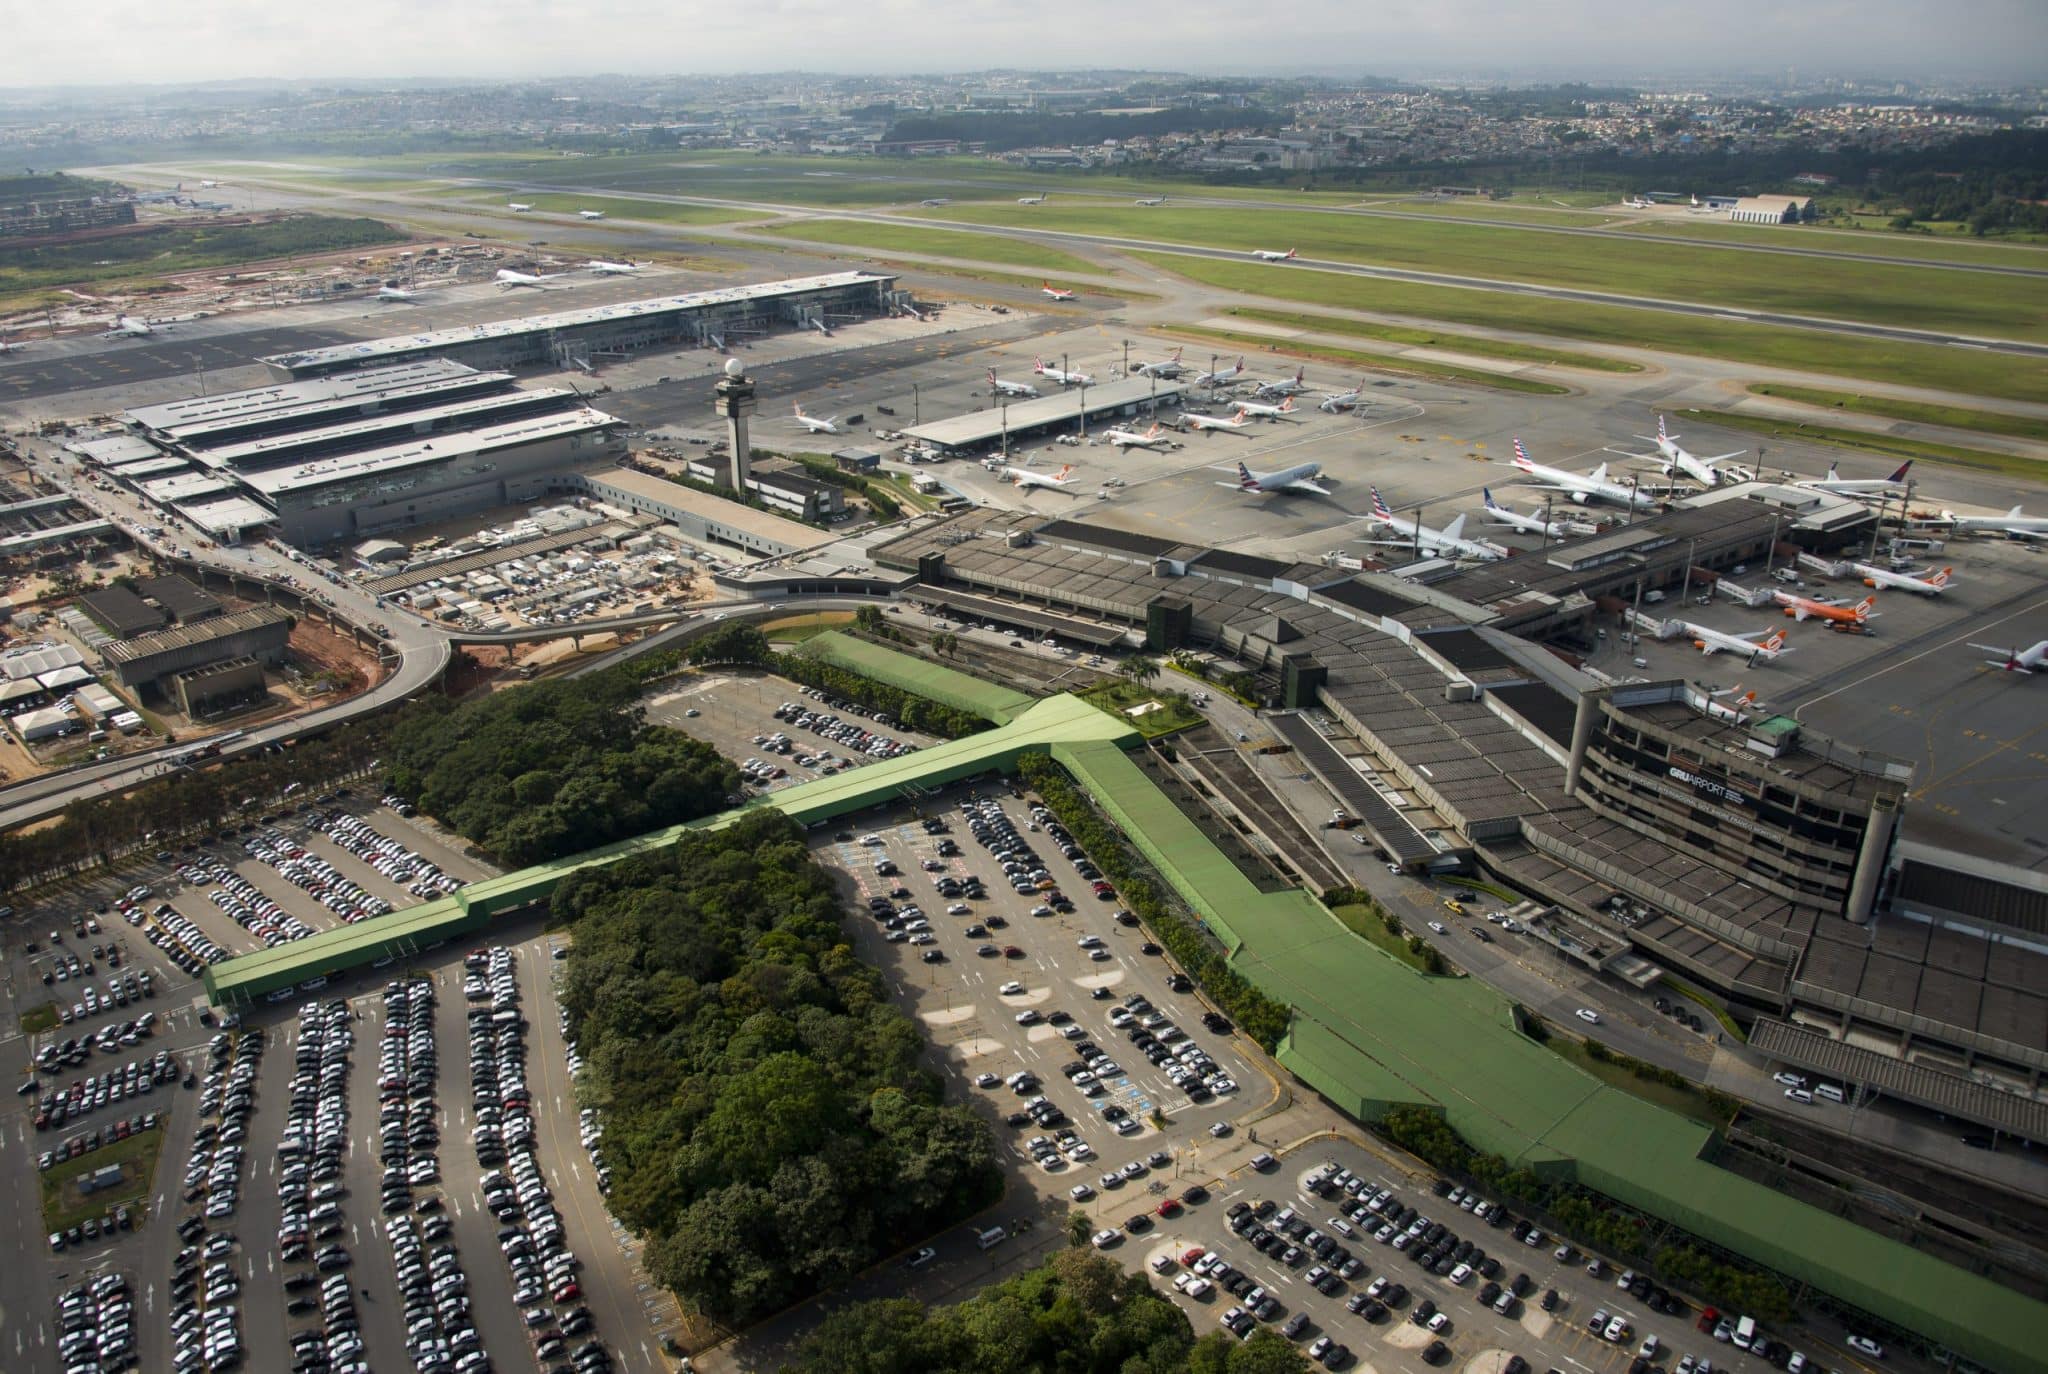 Sao Paulo Guarulhos International Airport is expected to receive 34 million passengers in 2022.